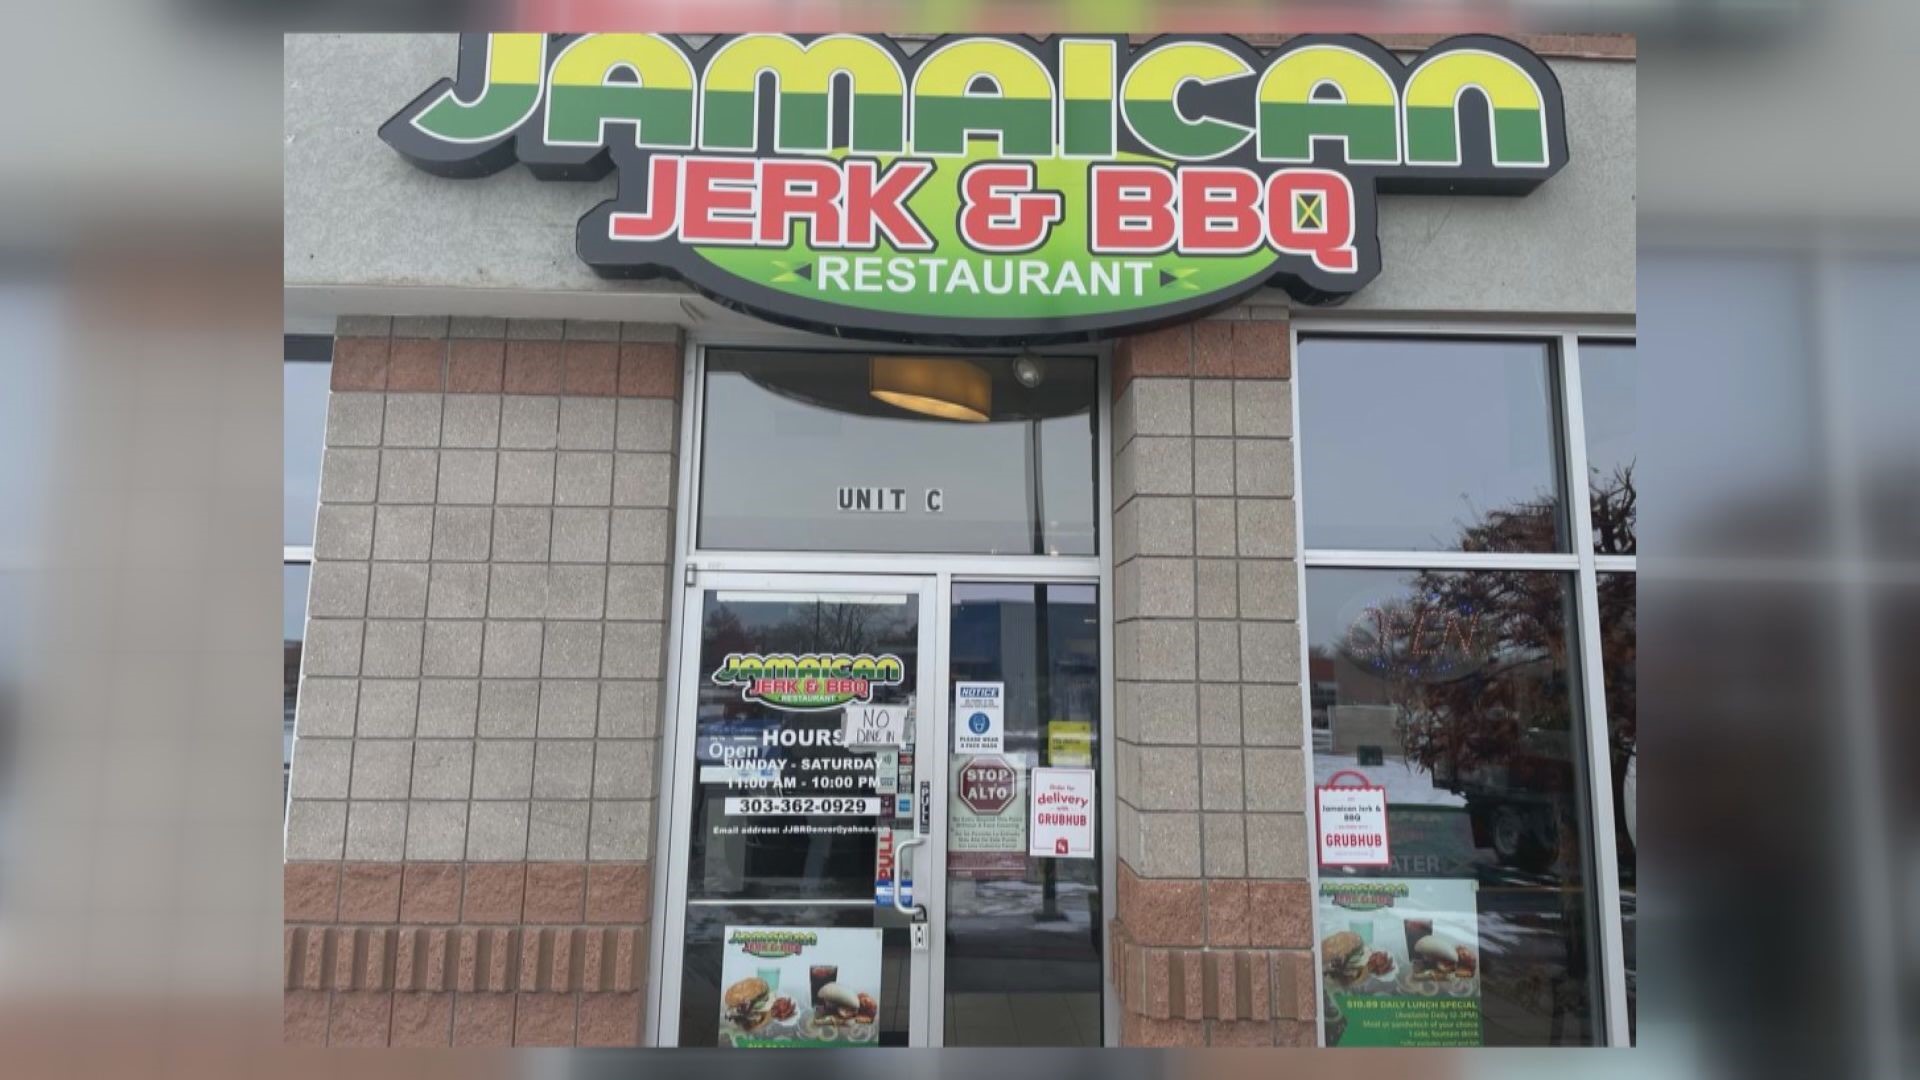 Business Brief host Ryan Frazier talks with the owners of northeast Denver's Jamaican Jerk and BBQ Restaurant on their efforts to grow as the economy recovers.